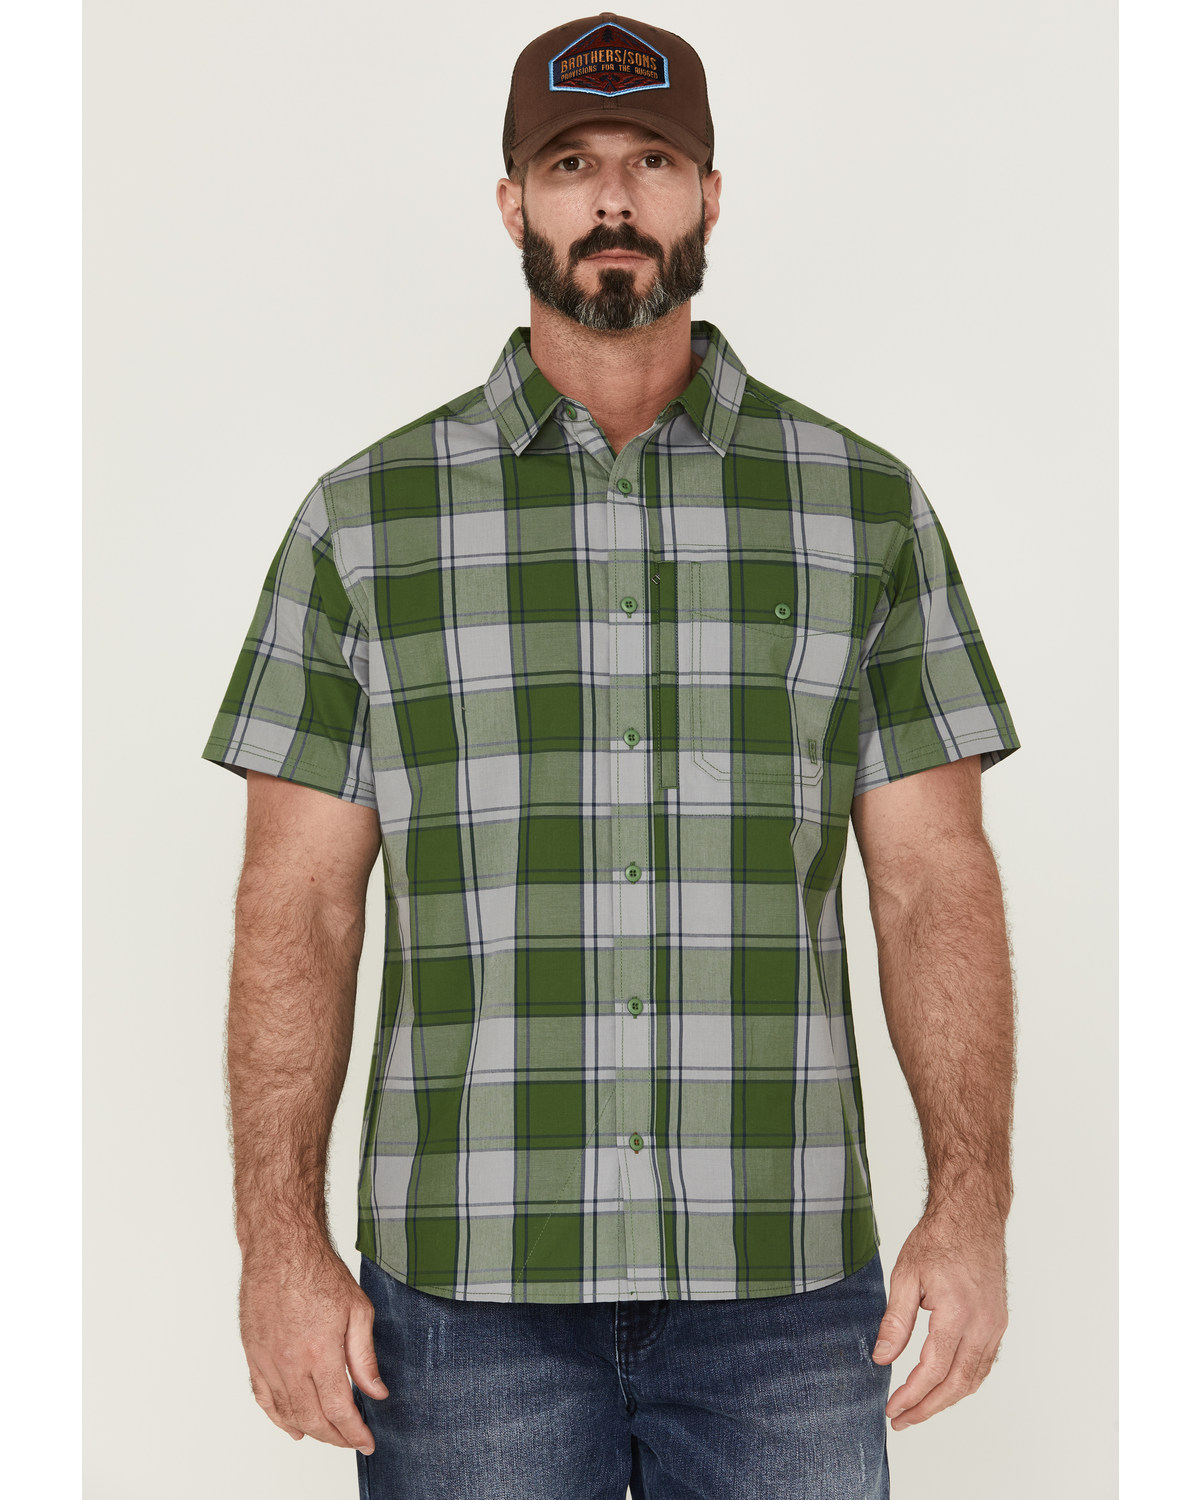 Brothers and Sons Men's Large Plaid Short Sleeve Button-Down Western Performance Shirt